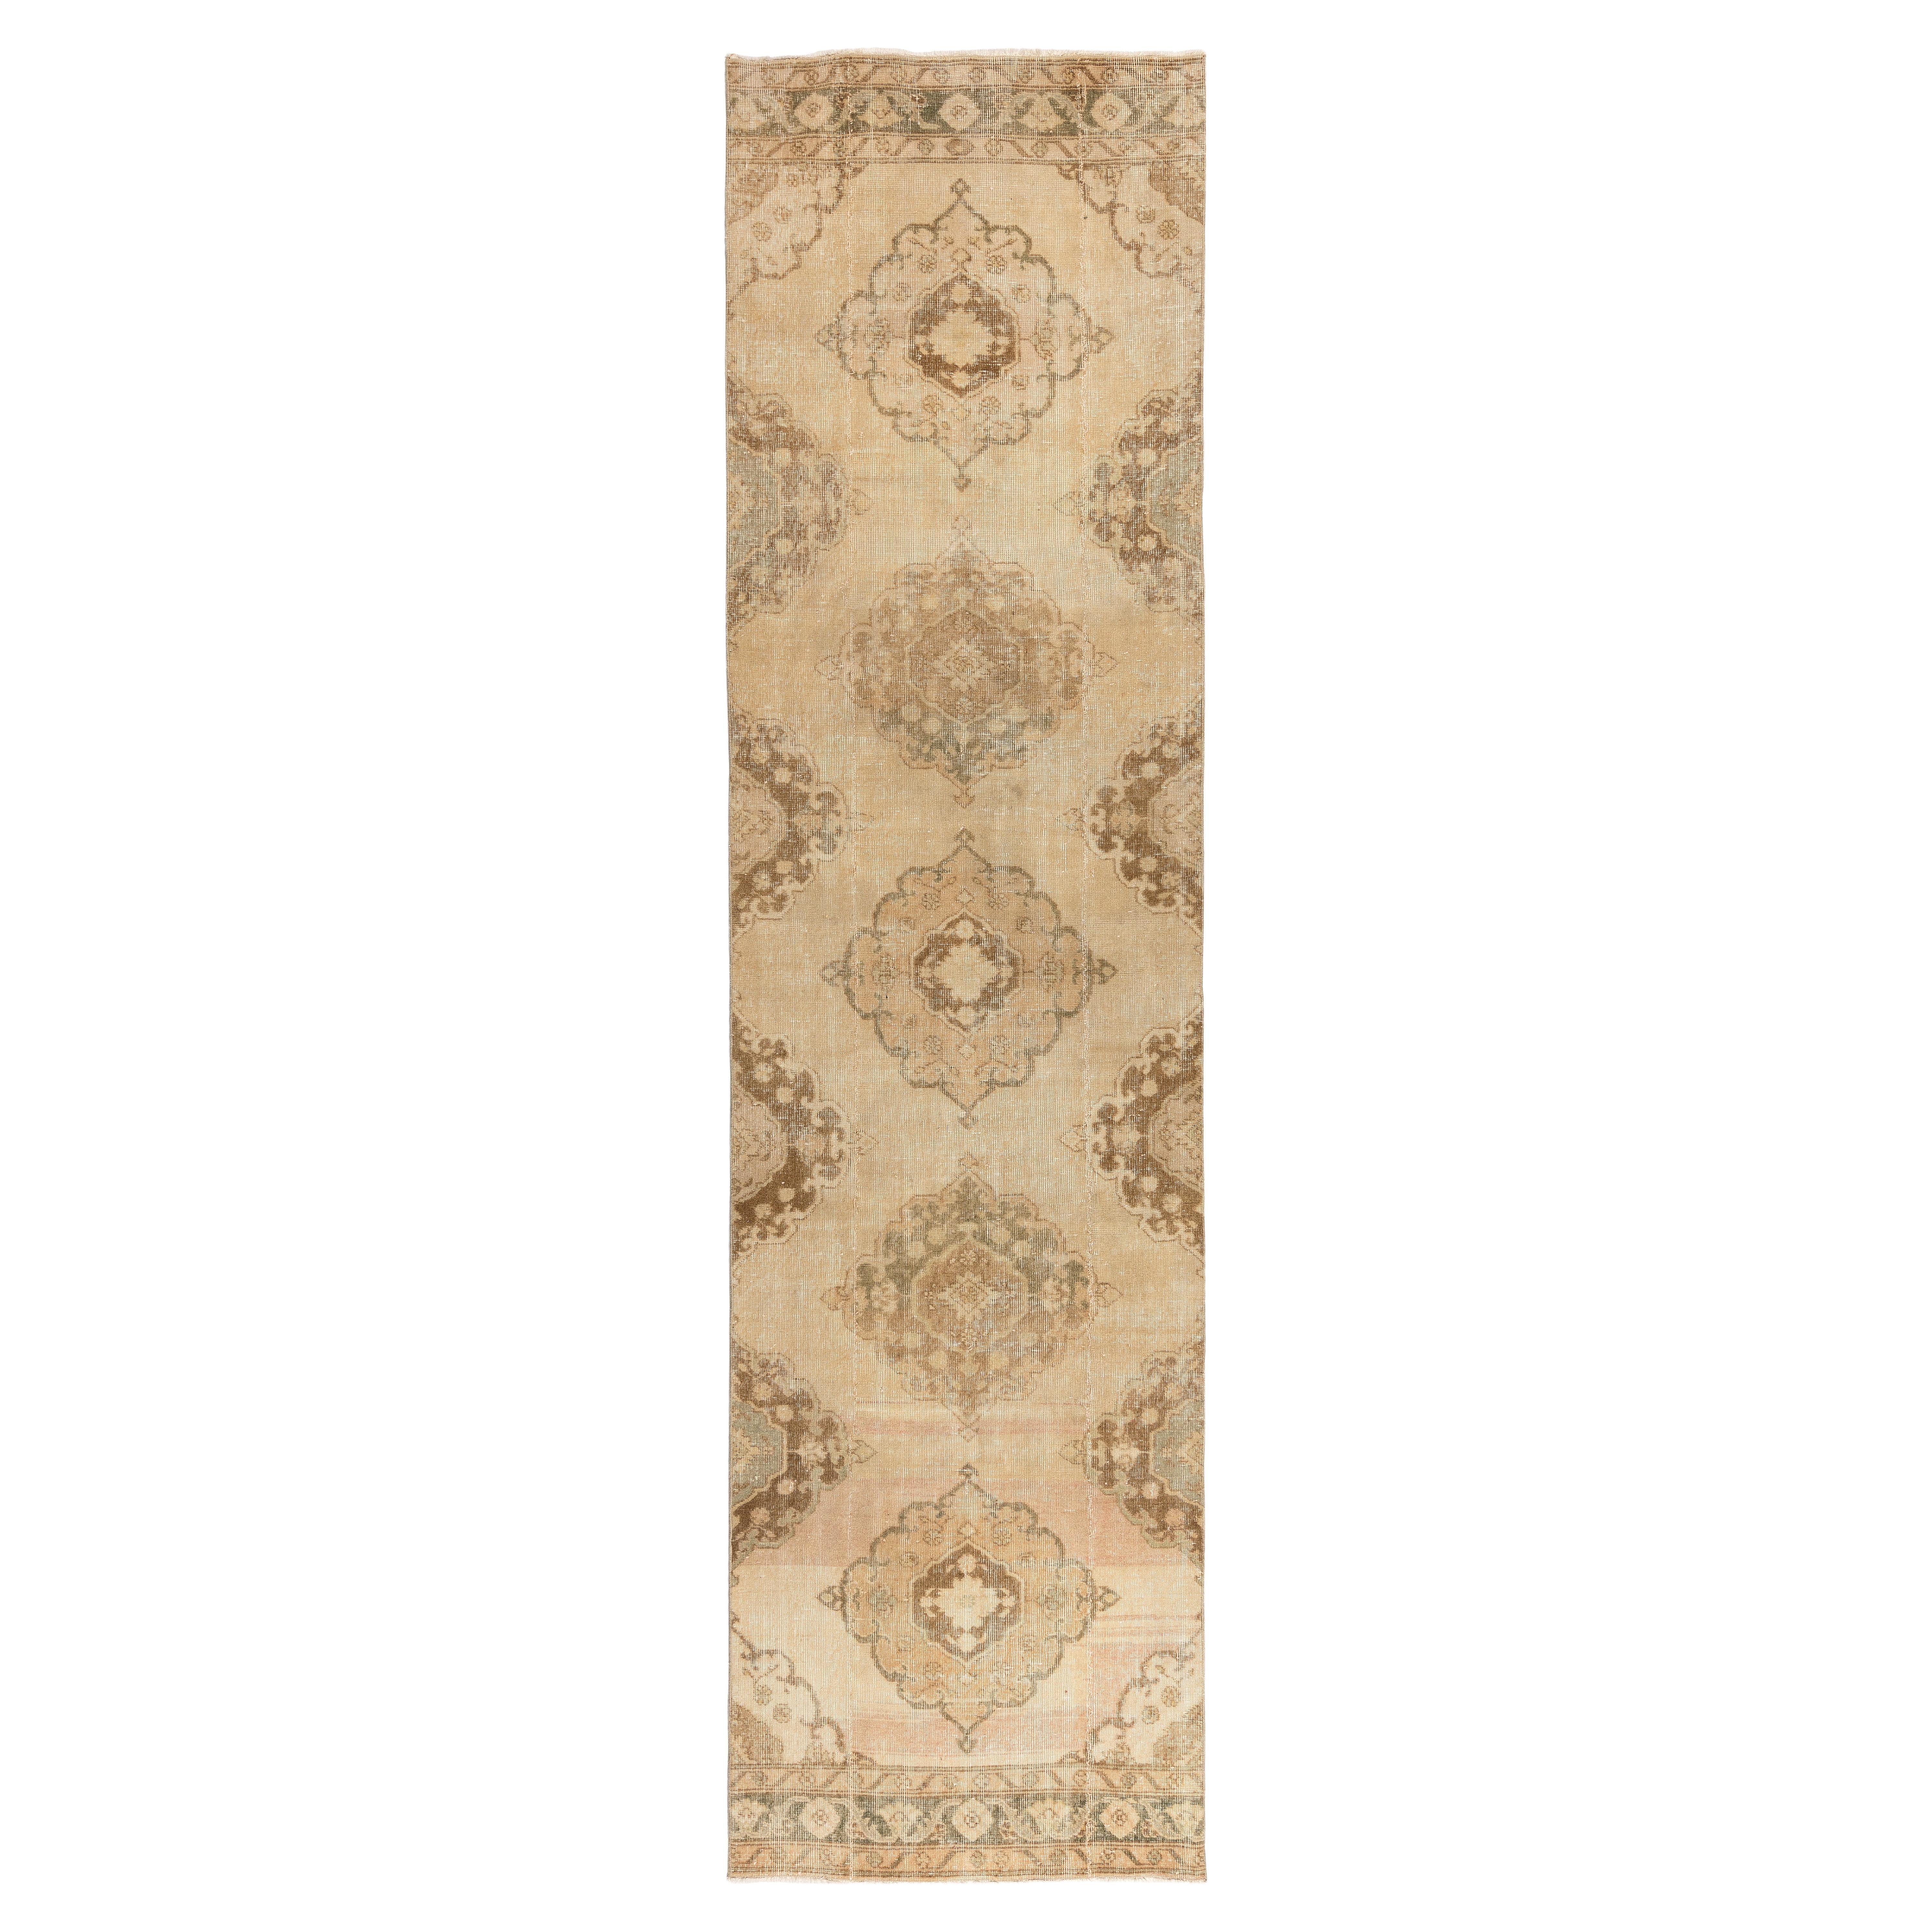 4.6x12.3 ft Vintage Hallway Rug, Ca 1960, Turkish Hand Knotted Wool Runner Rug For Sale